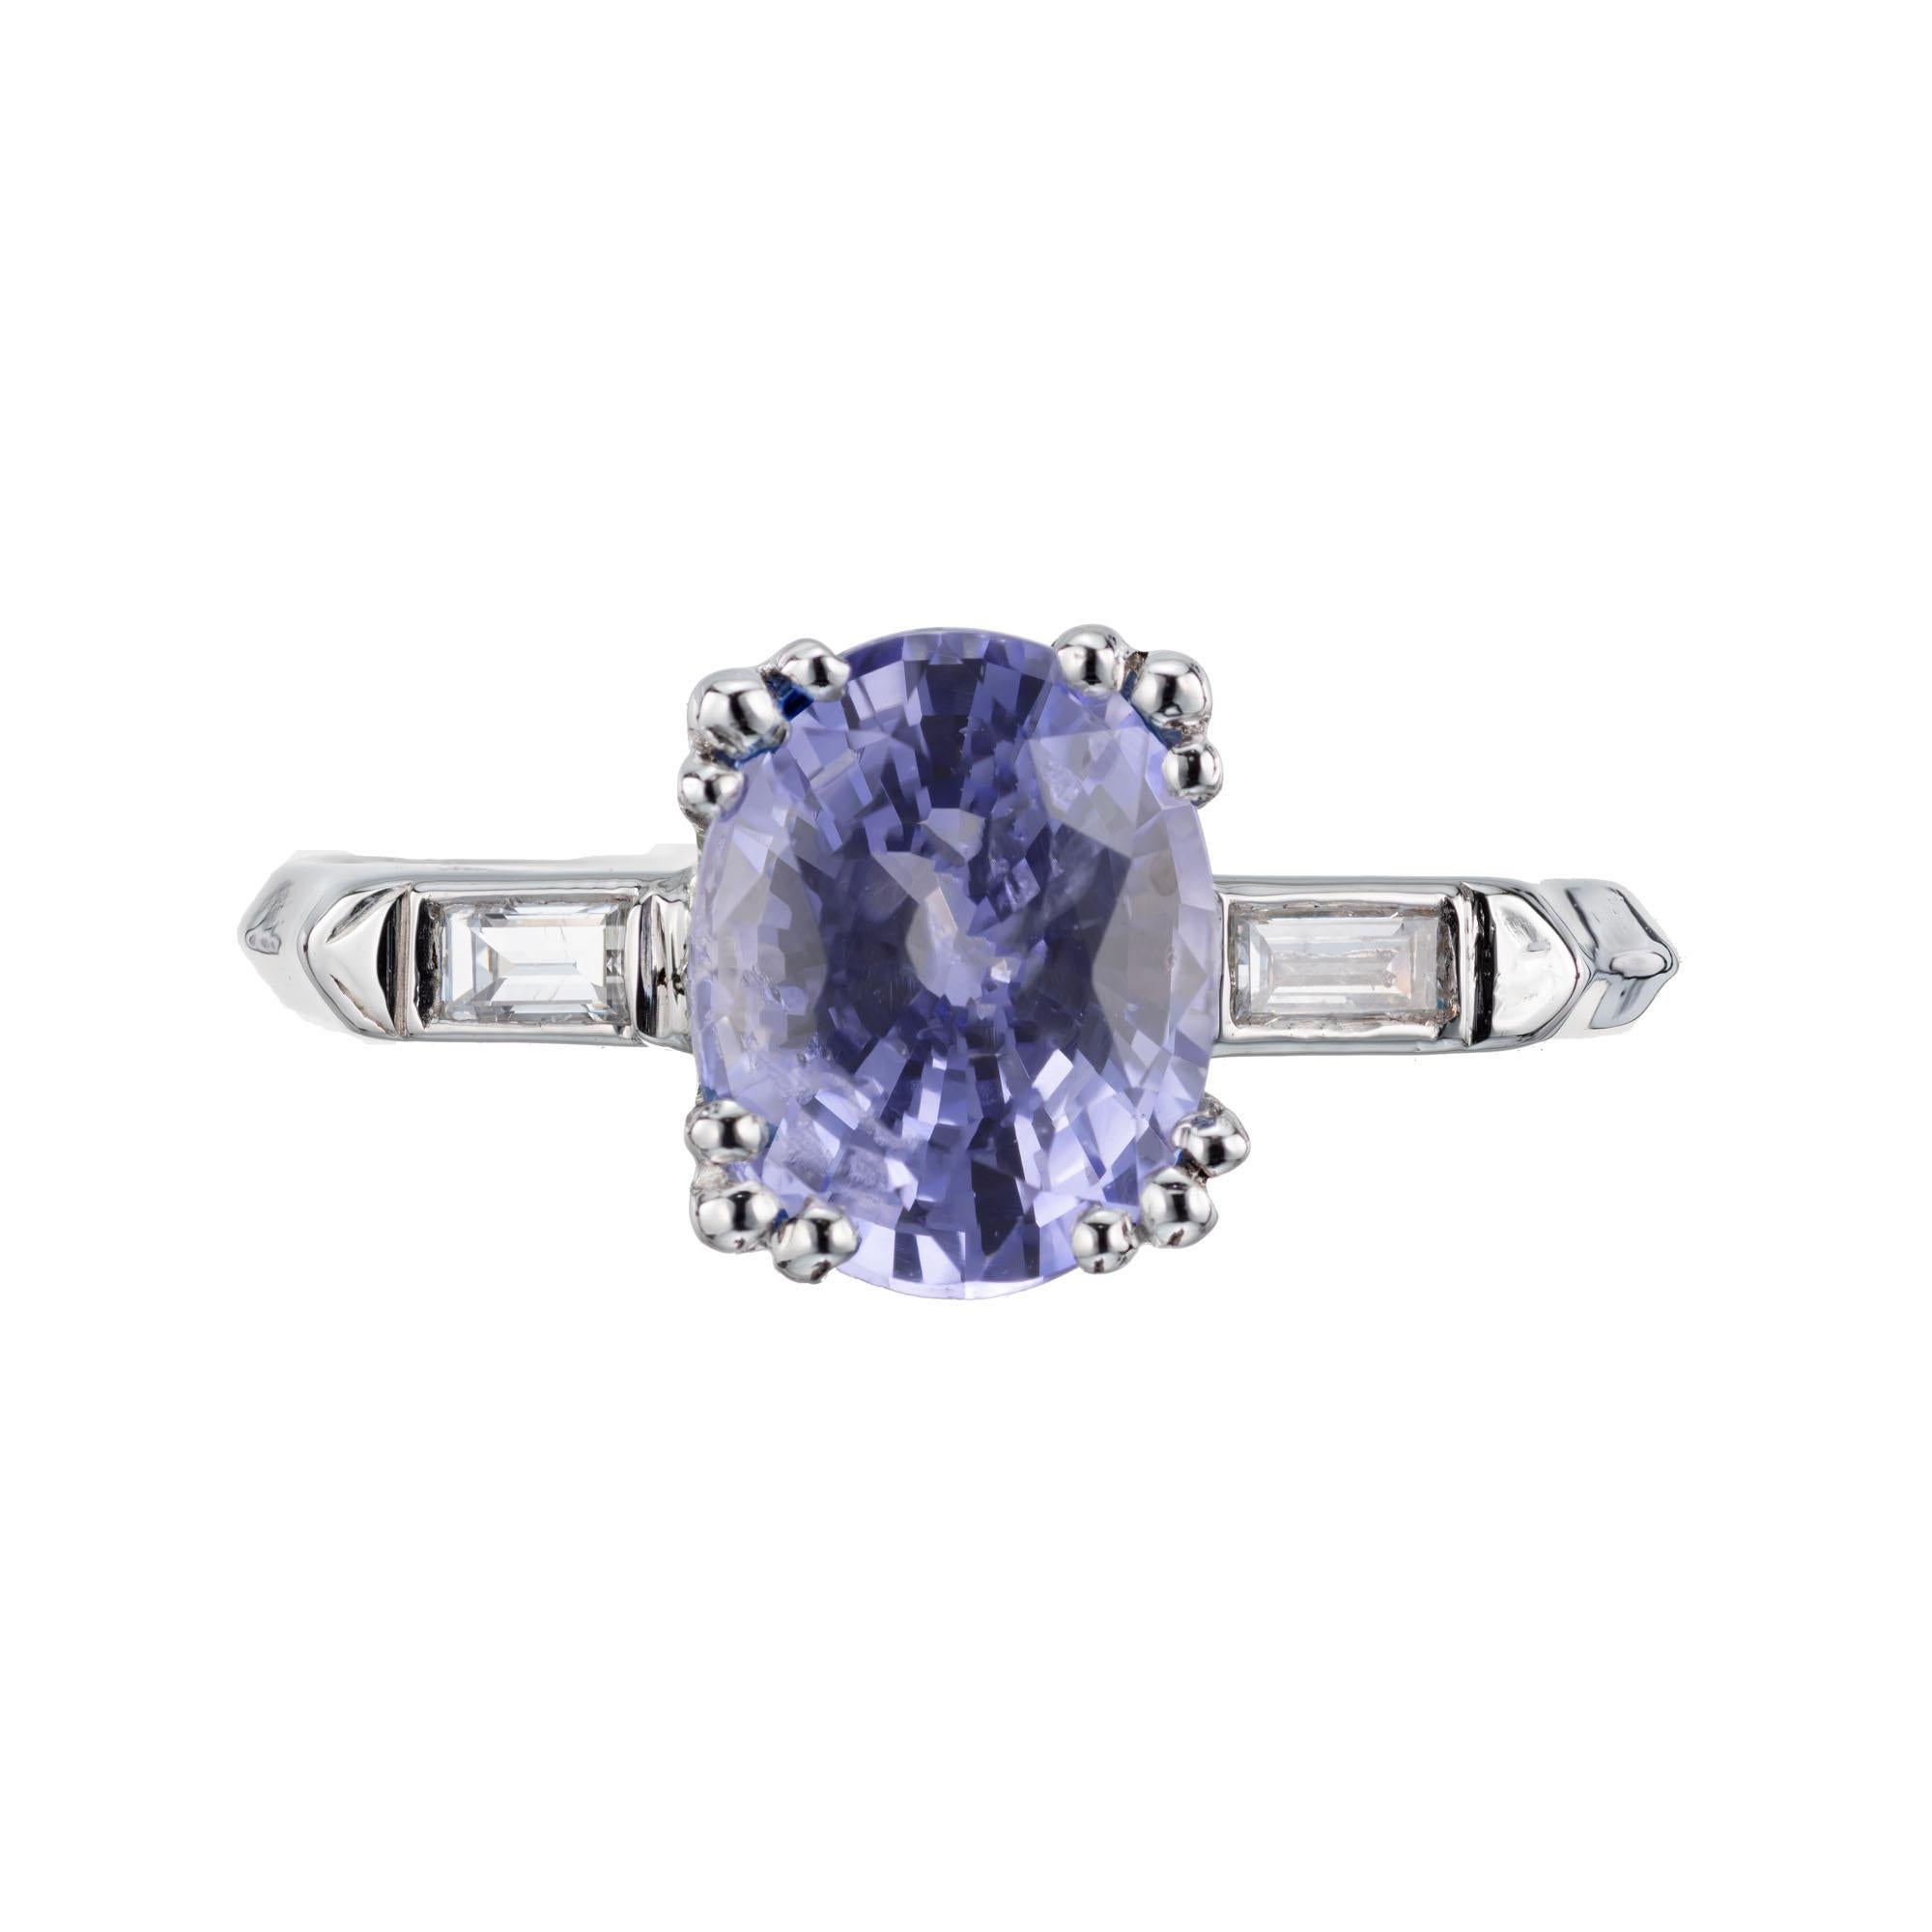 Vintage 1940's sapphire and diamond engagement ring. GIA certified periwinkle oval center sapphire with two baguette side diamonds set in a platinum three-stone setting. 

1 oval violet periwinkle blue sapphire H SI, approx. 2.24cts GIA Certificate